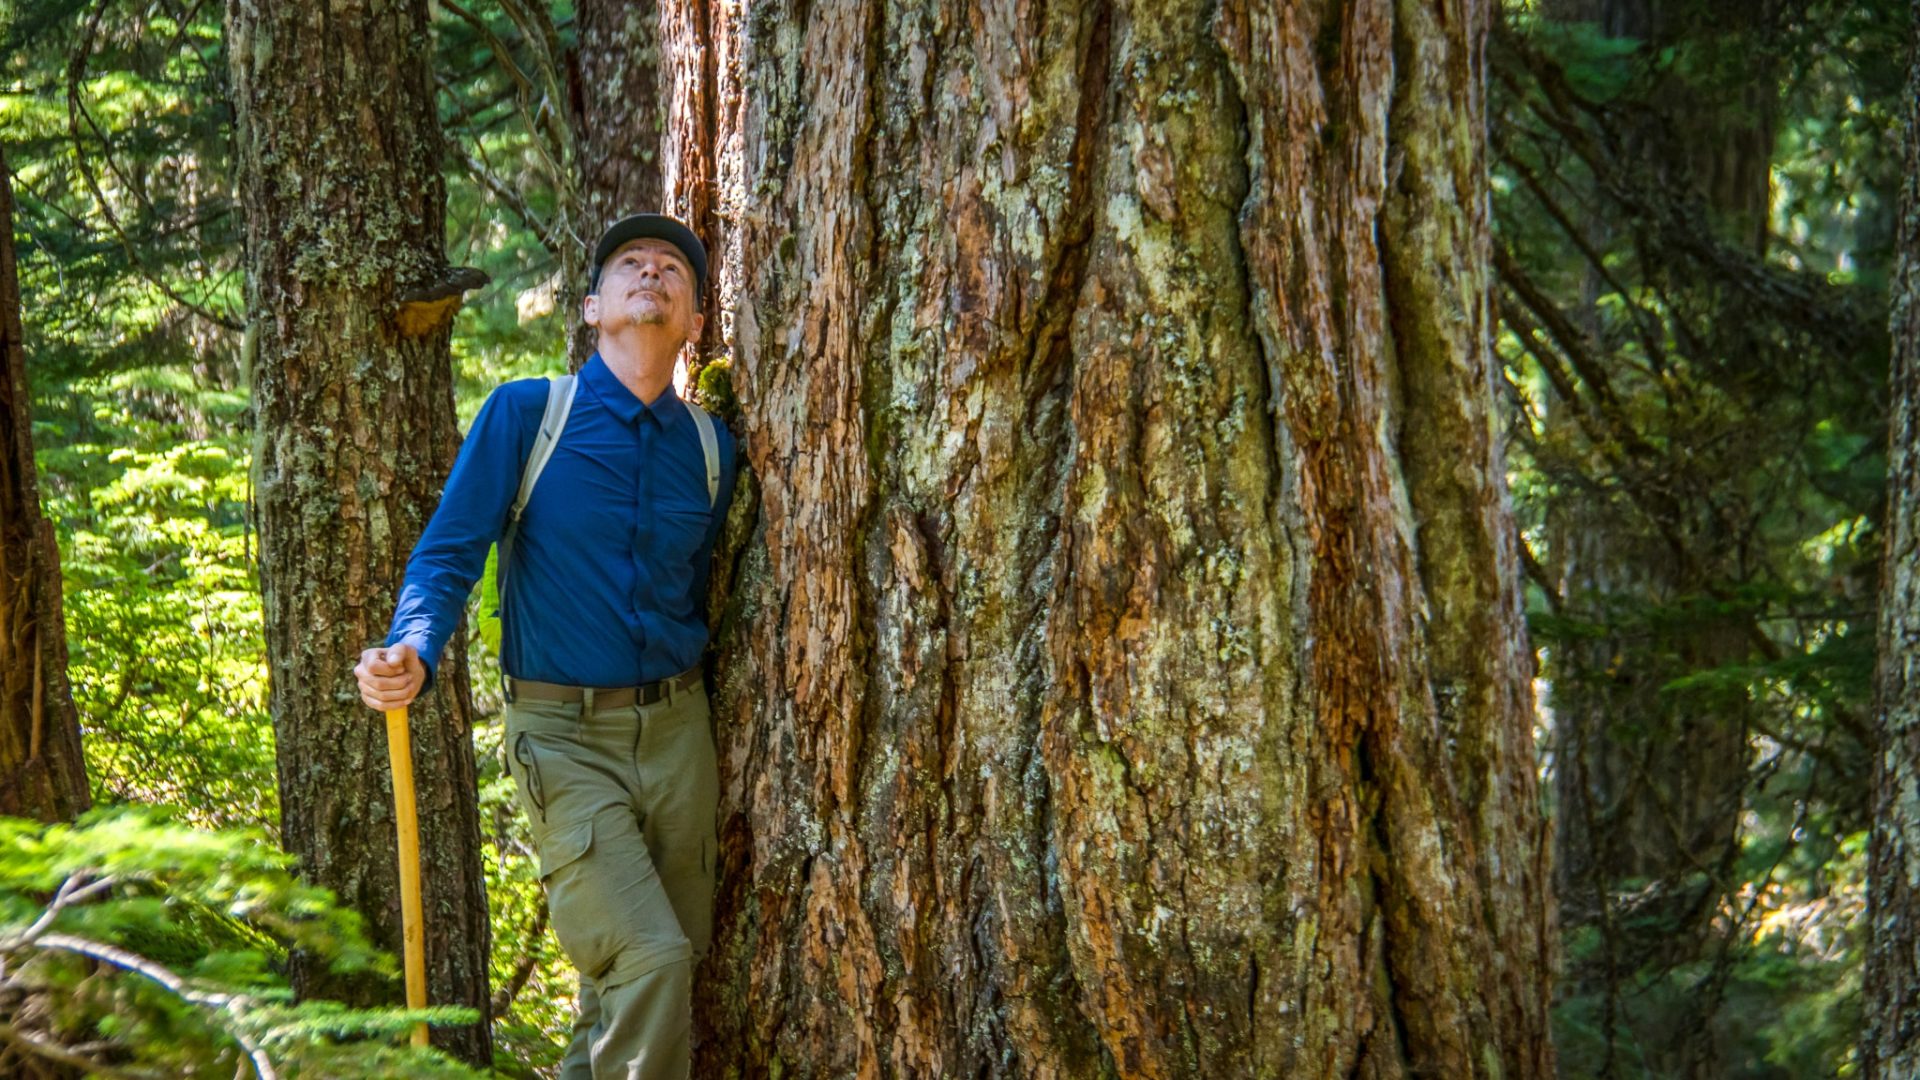 A hiker leans against a large tree in a forest and looks up. He holds a hiking pole and wears a backpack.